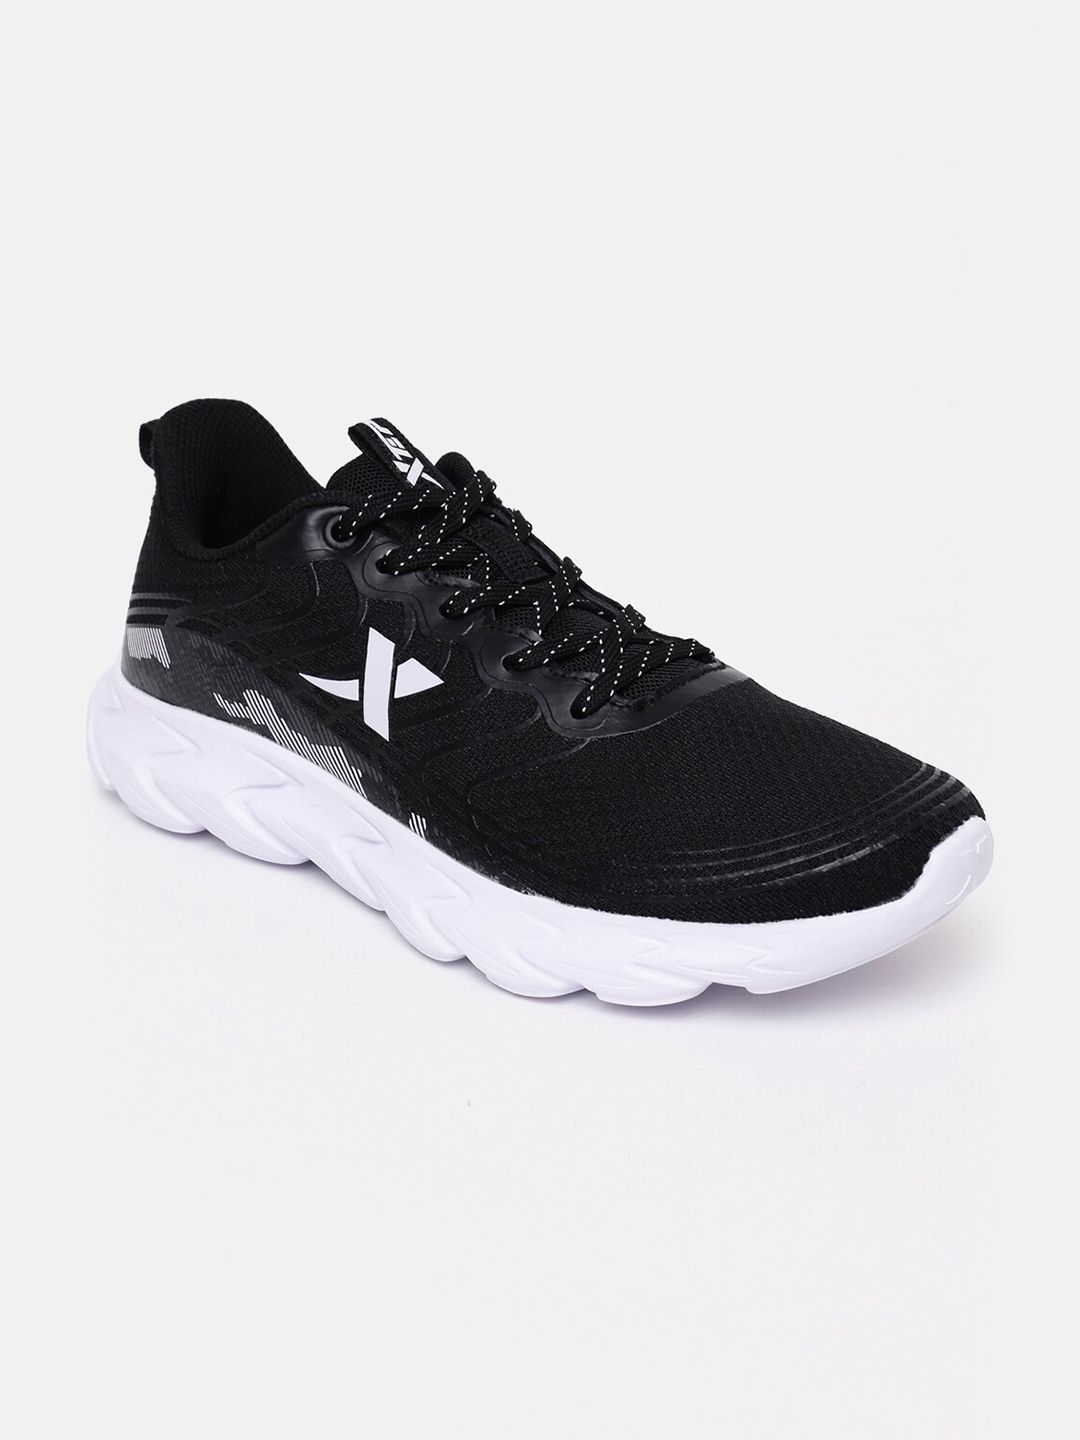 Xtep Women Black Textile Running Non-Marking Keep Moving Shoes Price in India